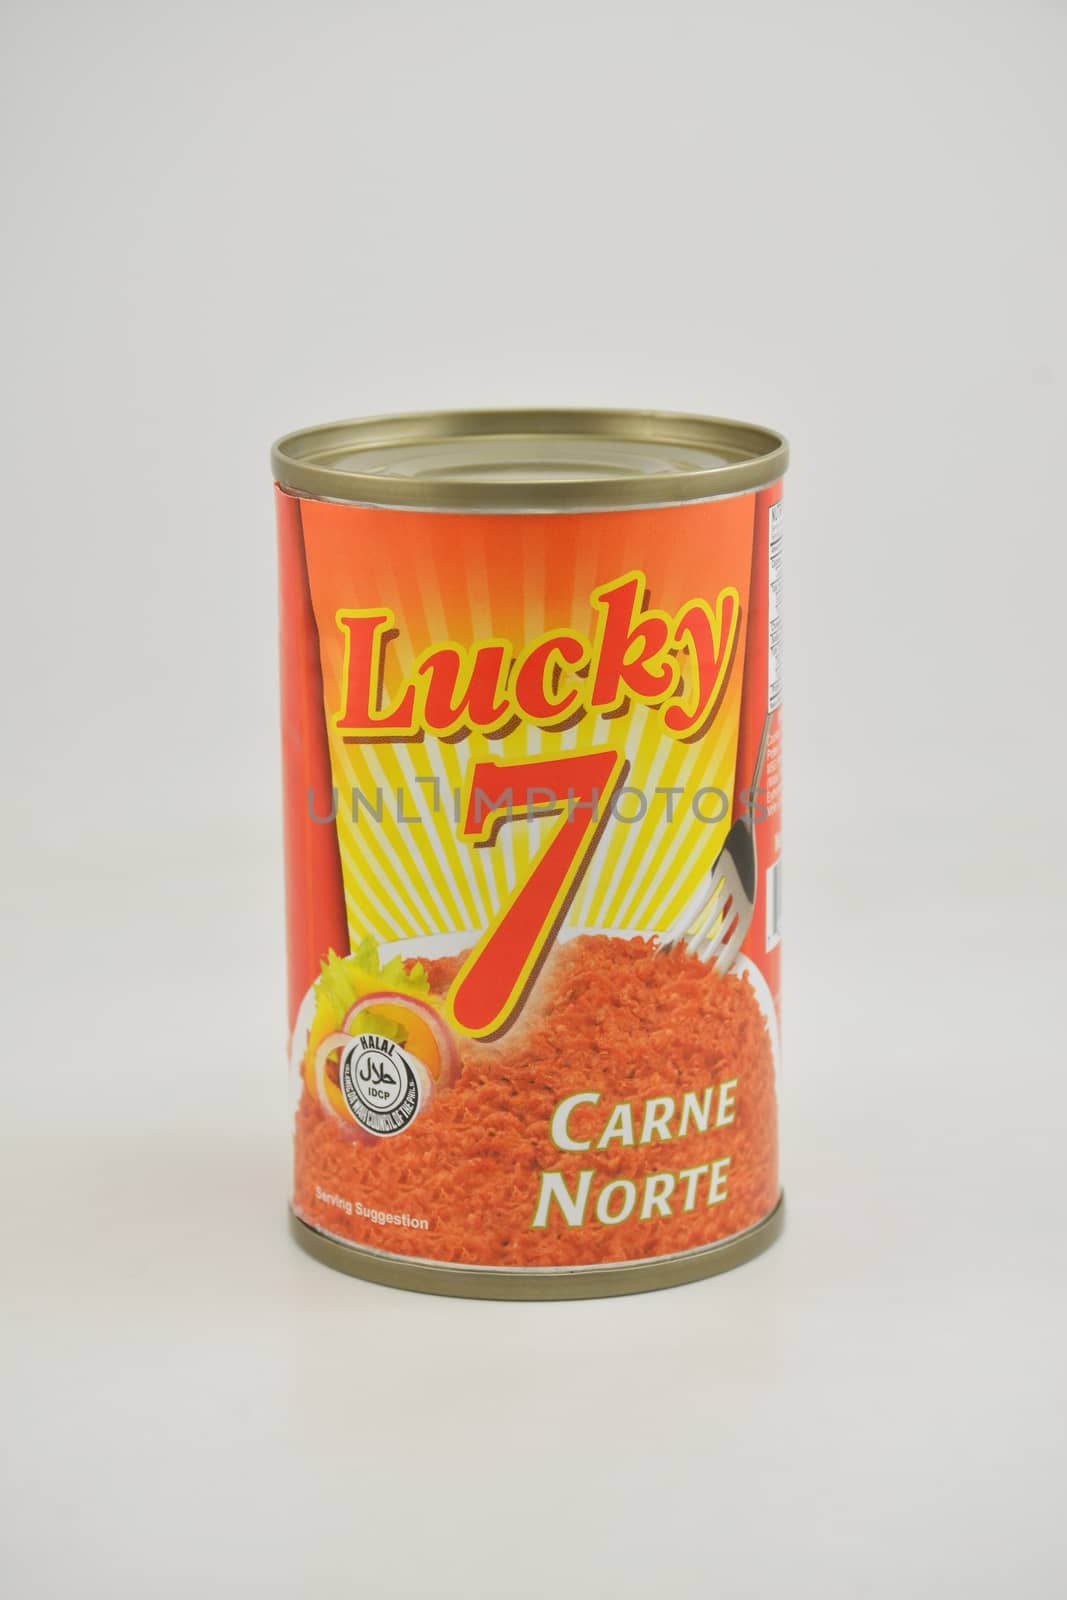 MANILA, PH - JUNE 26 - Lucky 7 carne norte corned beef can on June 26, 2020 in Manila, Philippines.